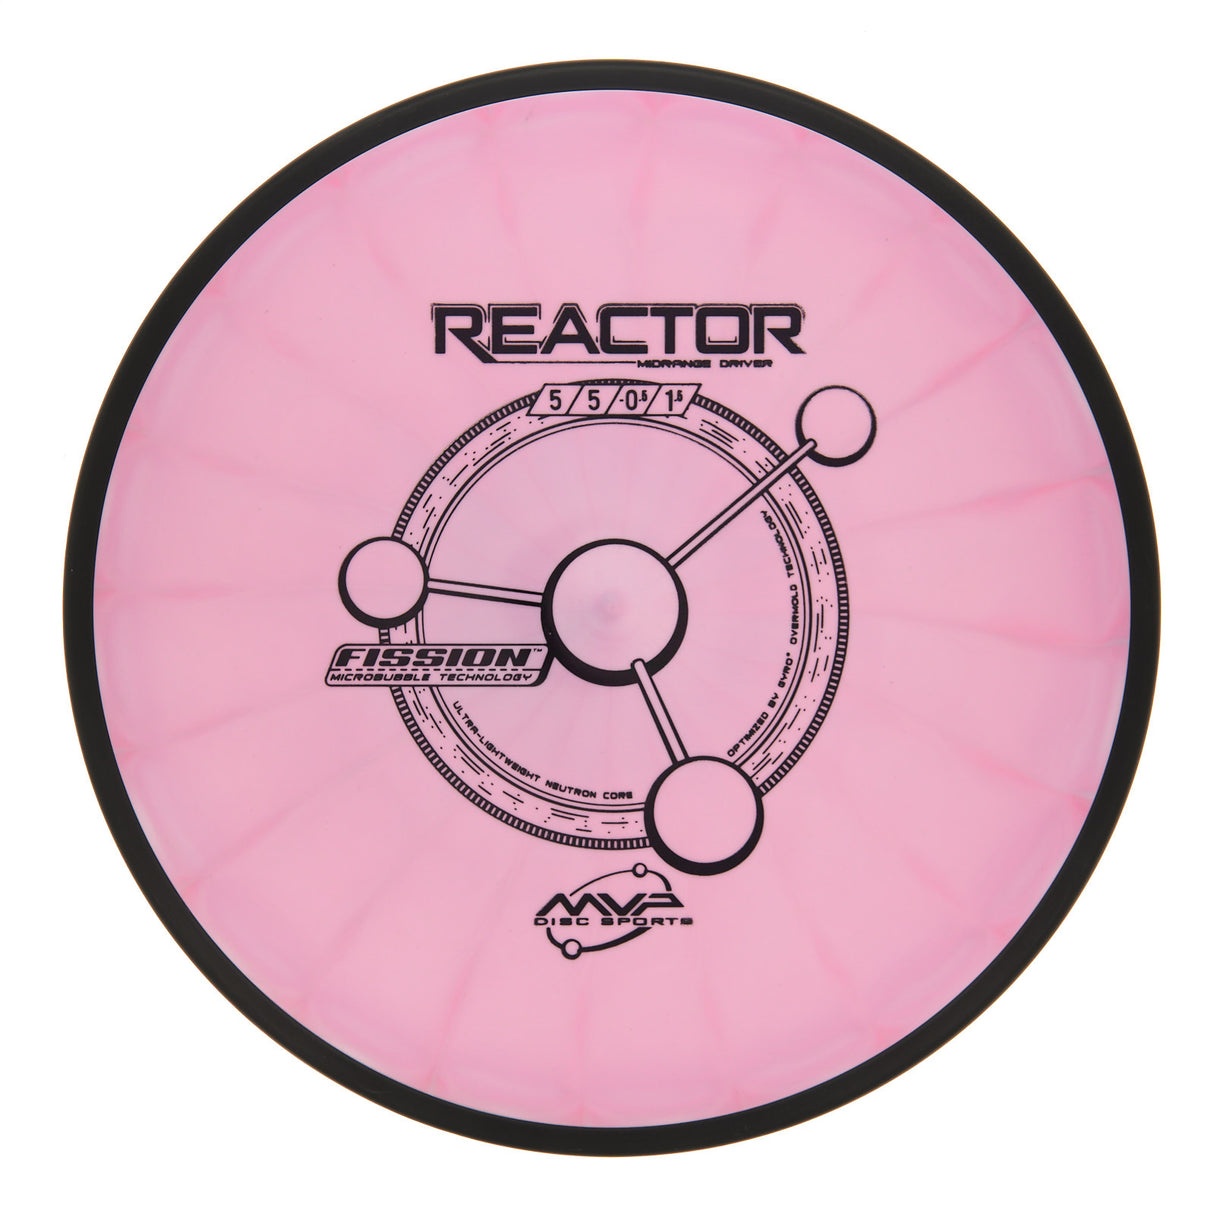 MVP Reactor - Fission 175g | Style 0001